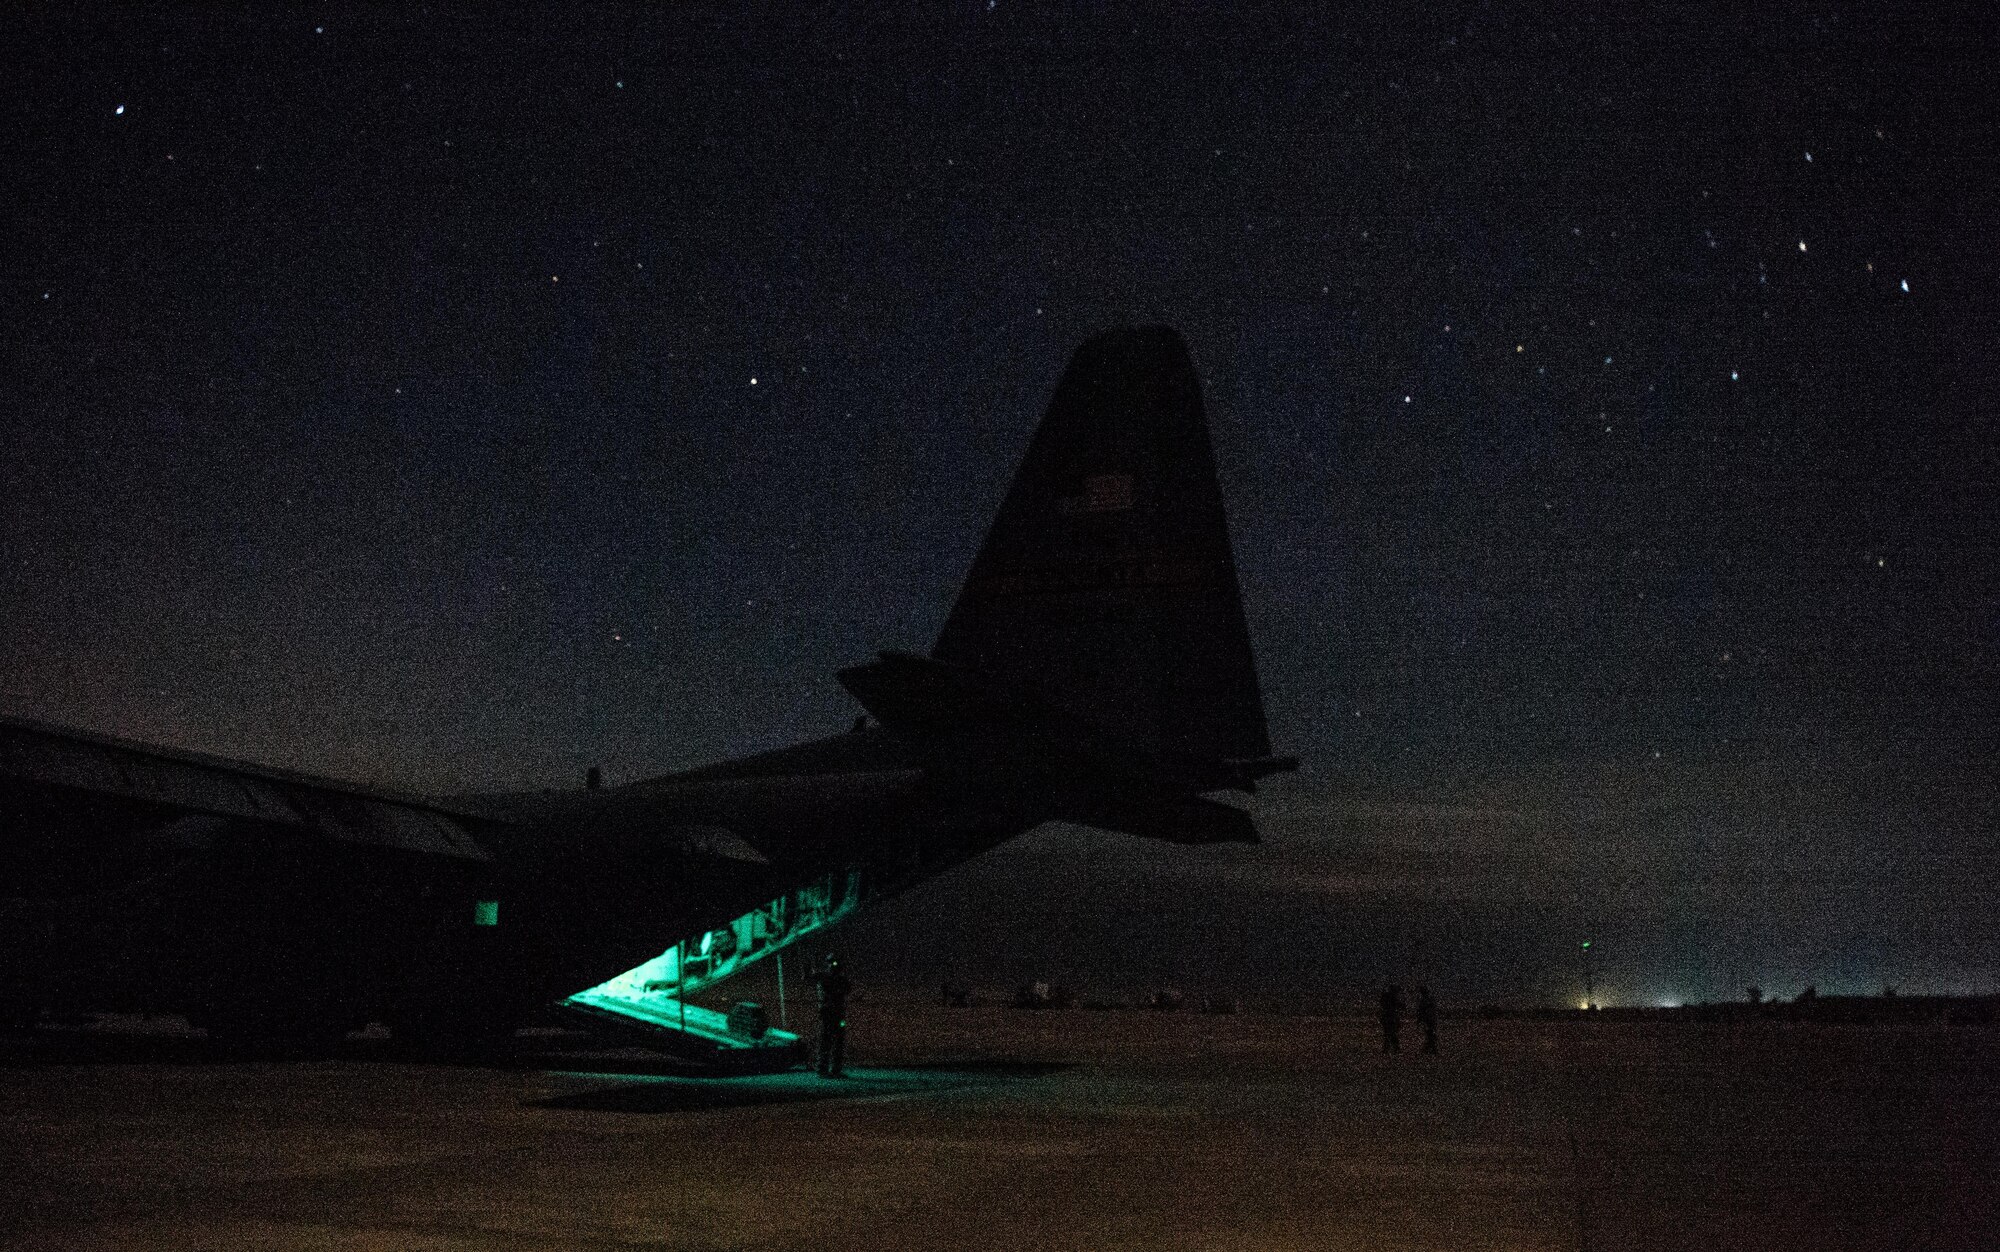 U.S. Air Force Staff Sgt. Nick Barth, 737th Expeditionary Airlift Squadron loadmaster, finishes unloading a C-130 Hercules at Qayyarah West Airfield , Iraq, Feb. 4, 2017. Barth was part of a team that delivered thousands of pounds in supplies to aide in the fight against the Islamic State of Iraq and the Levant and Mosul offensive. (U.S. Air Force photo by Senior Airman Jordan Castelan)